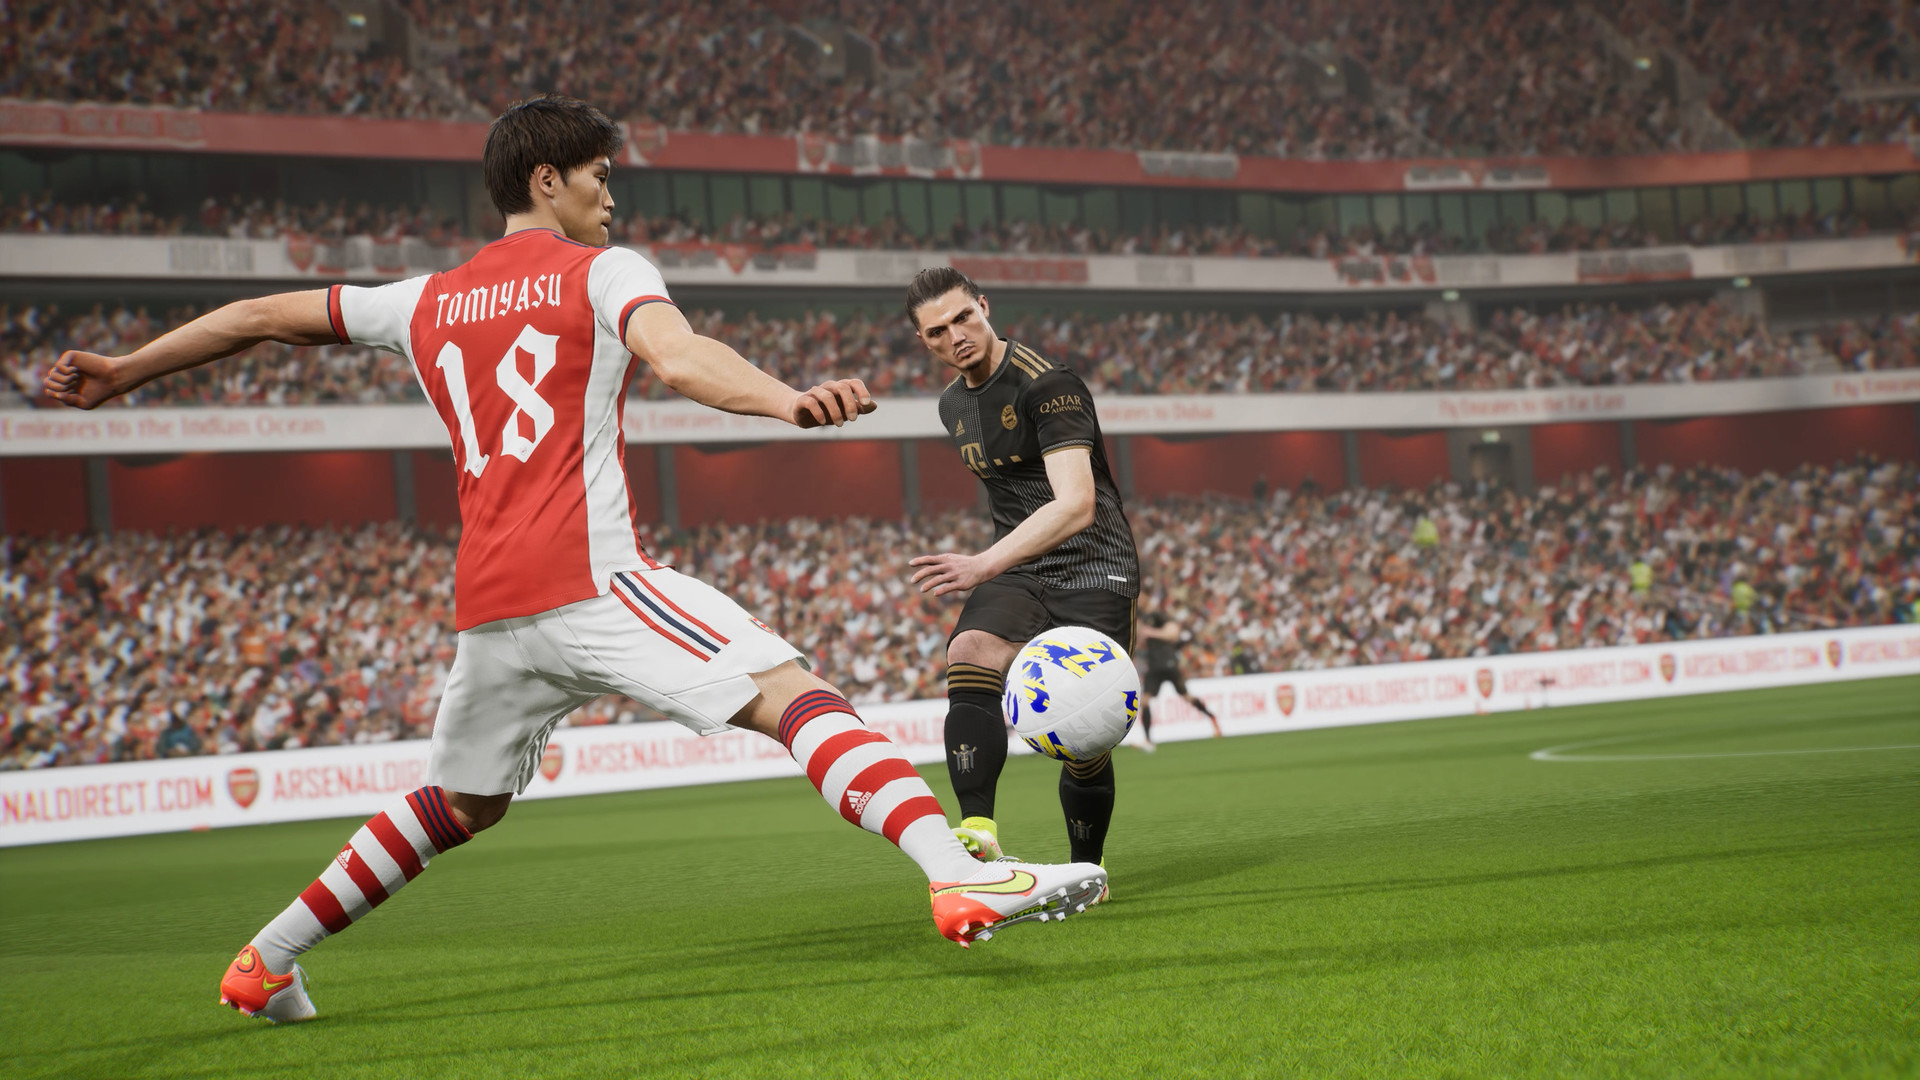 Efootball PES 2022 Wallpapers - Wallpaper Cave